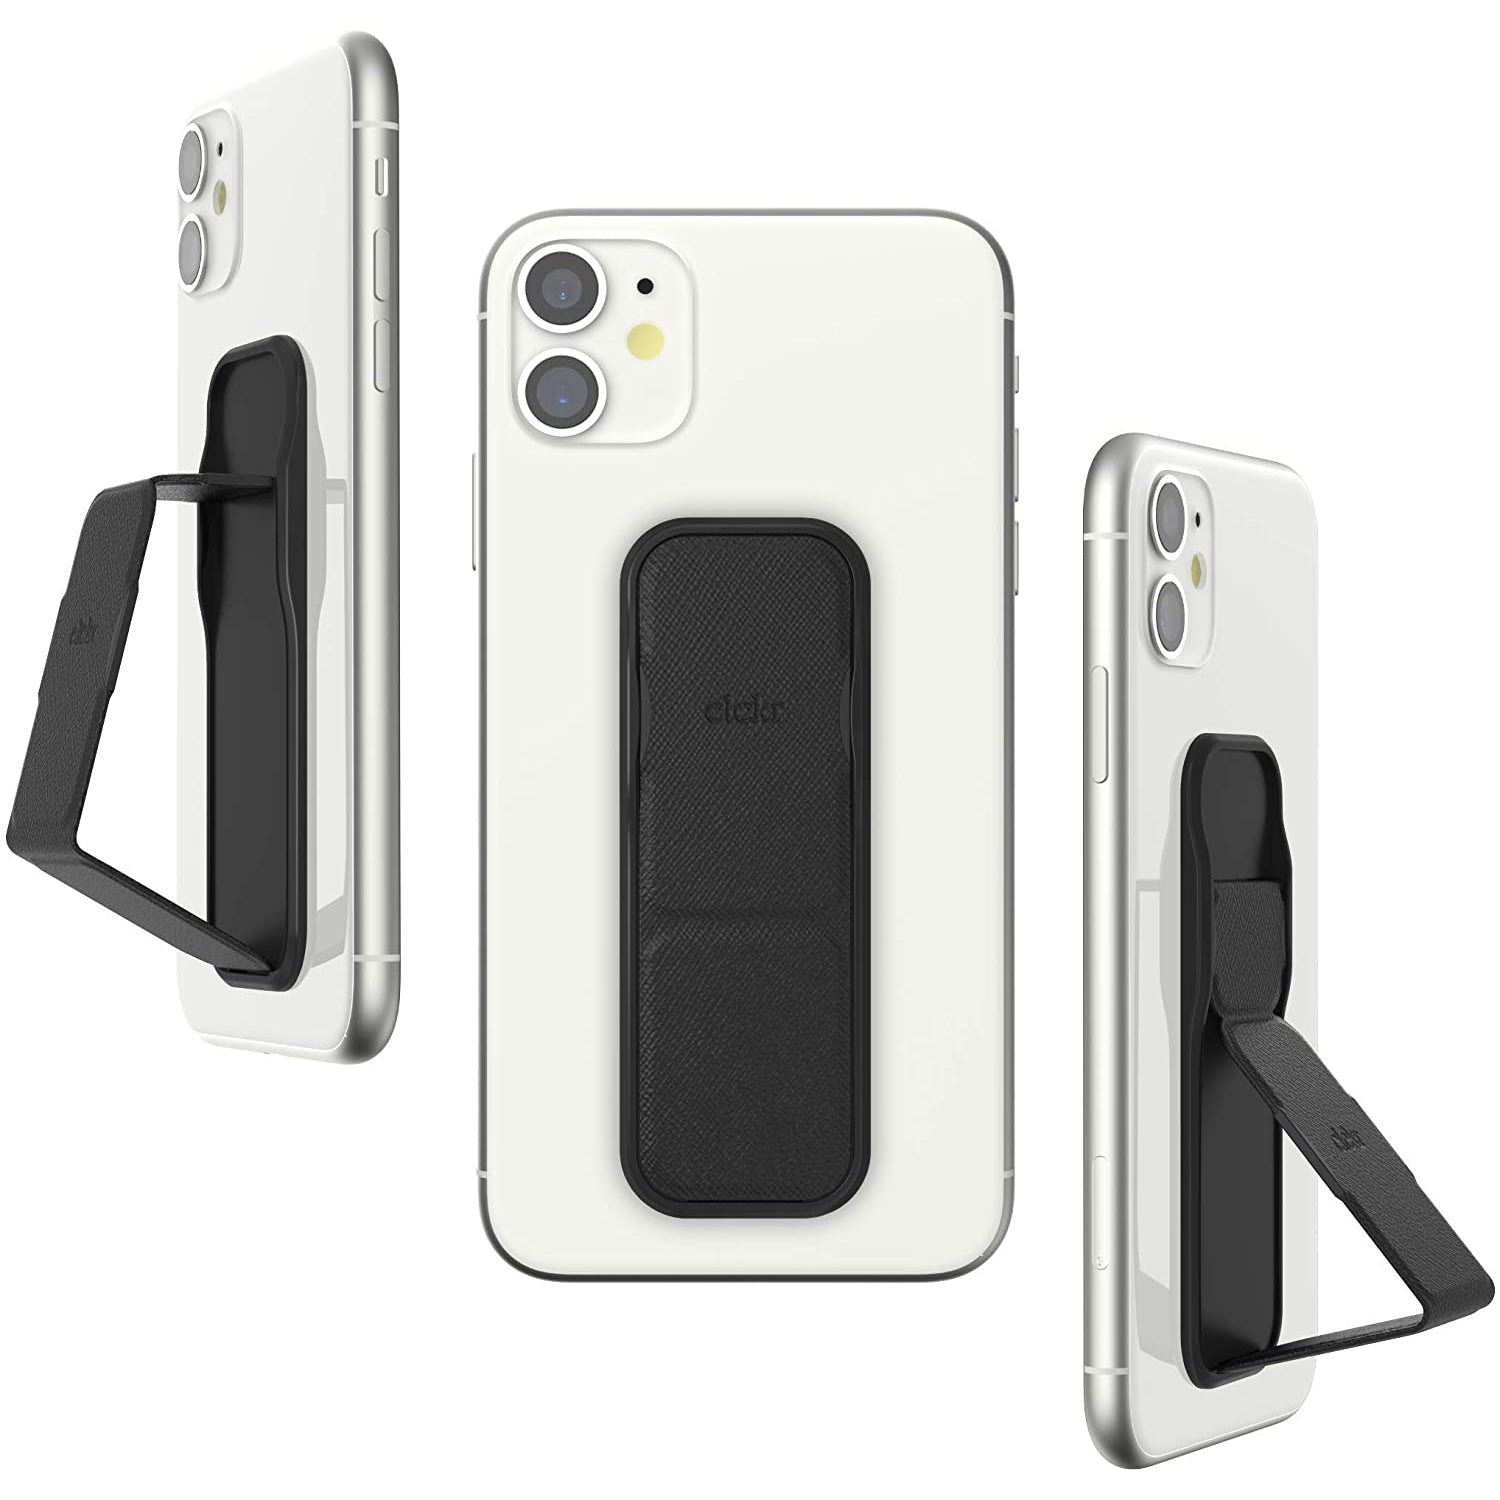 Clckr Phone Grip and Expanding Stand, Universal Phone Grip Holder with Multiple Viewing Angles